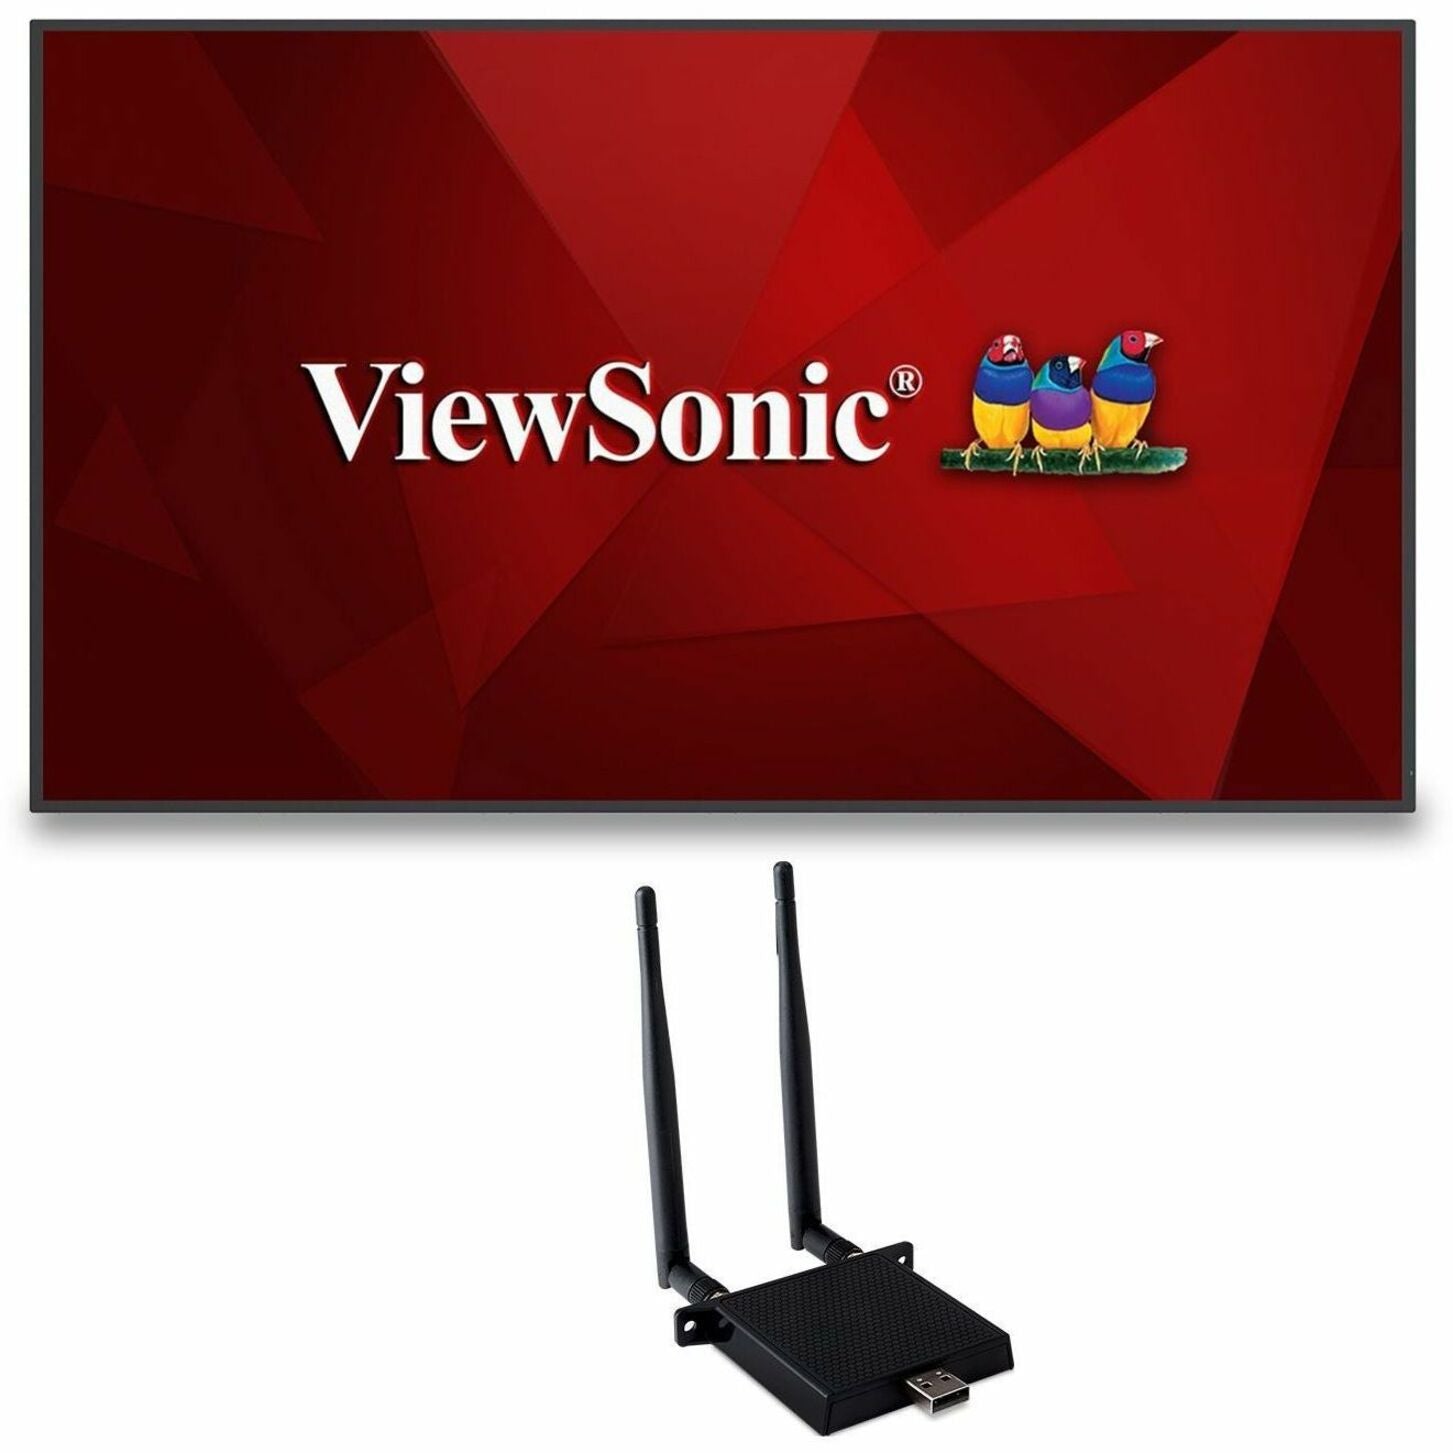 ViewSonic CDE9830-W1 98" 4K UHD CDE9830-W1 Digital Signage Display Bundle, Android 11, WiFi Dongle Included